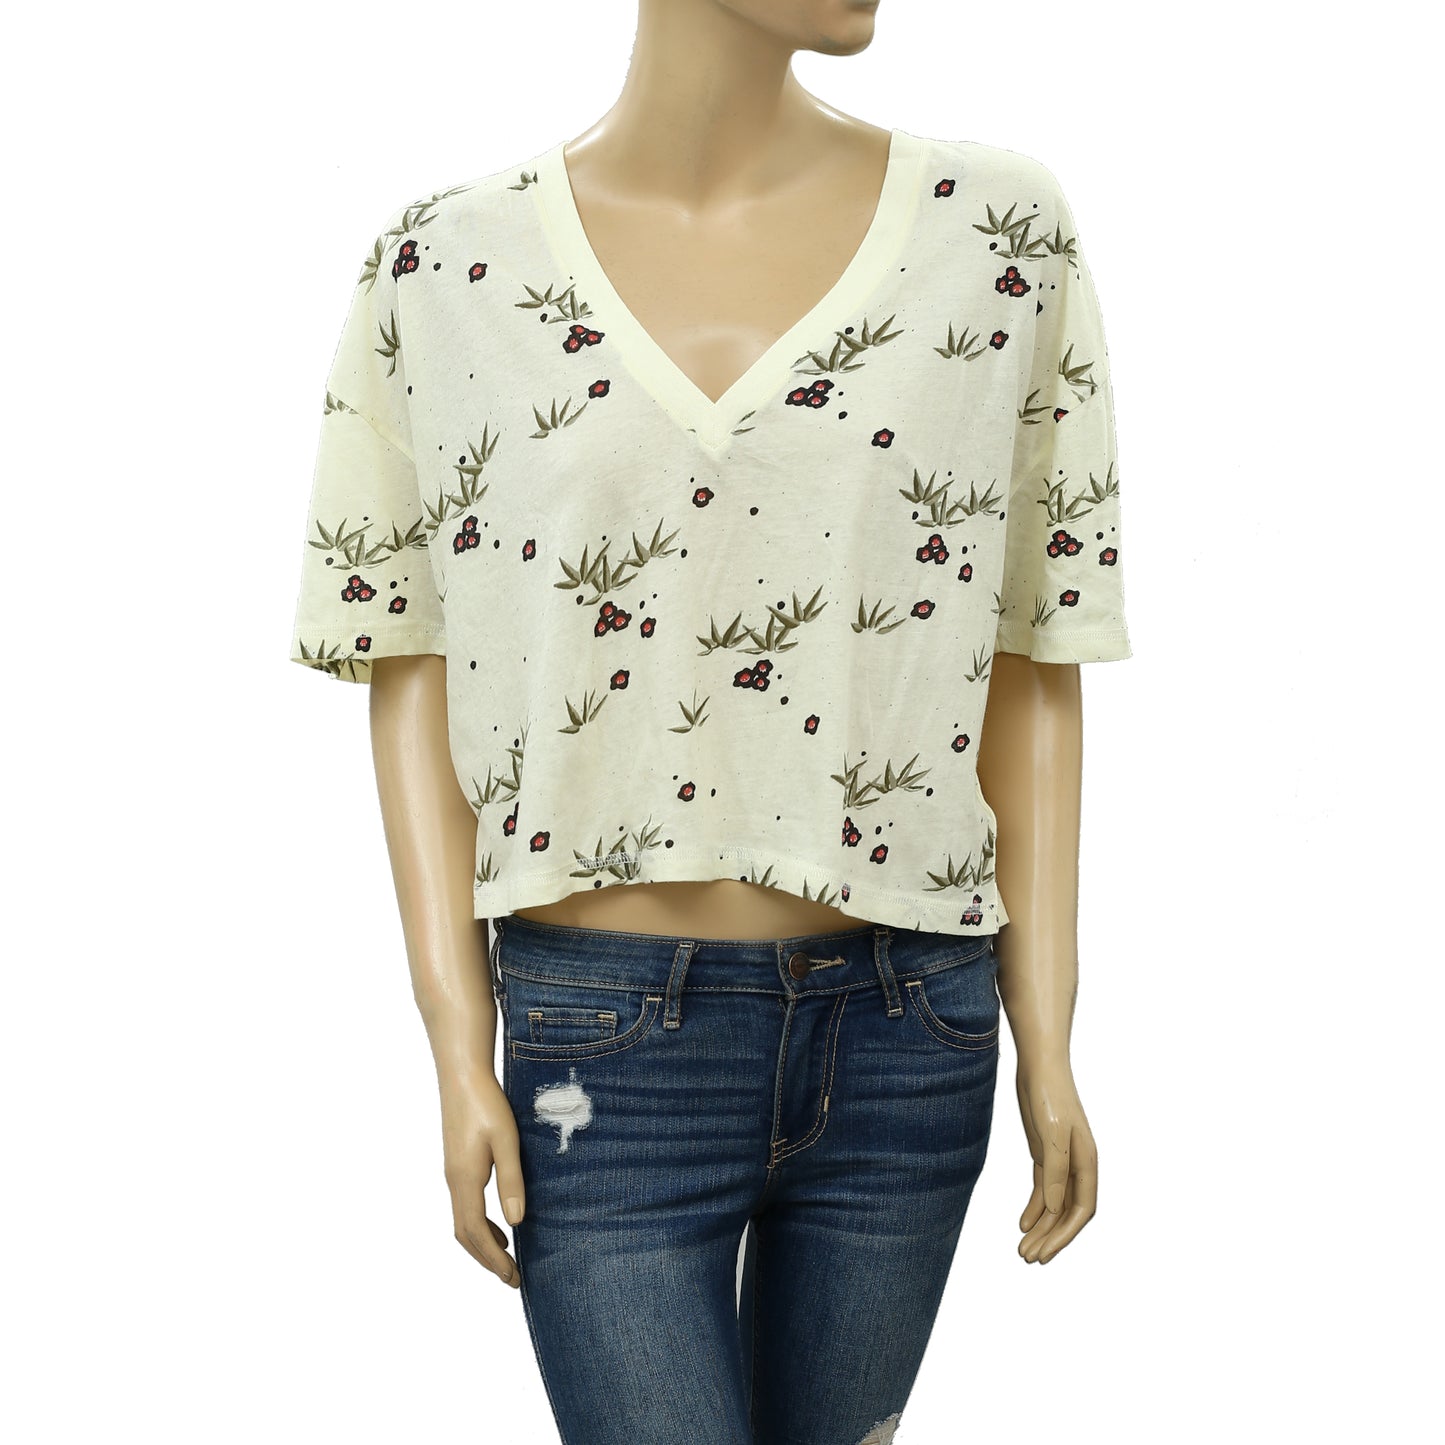 Urban Outfitters Floral Printed Blouse Cropped Top